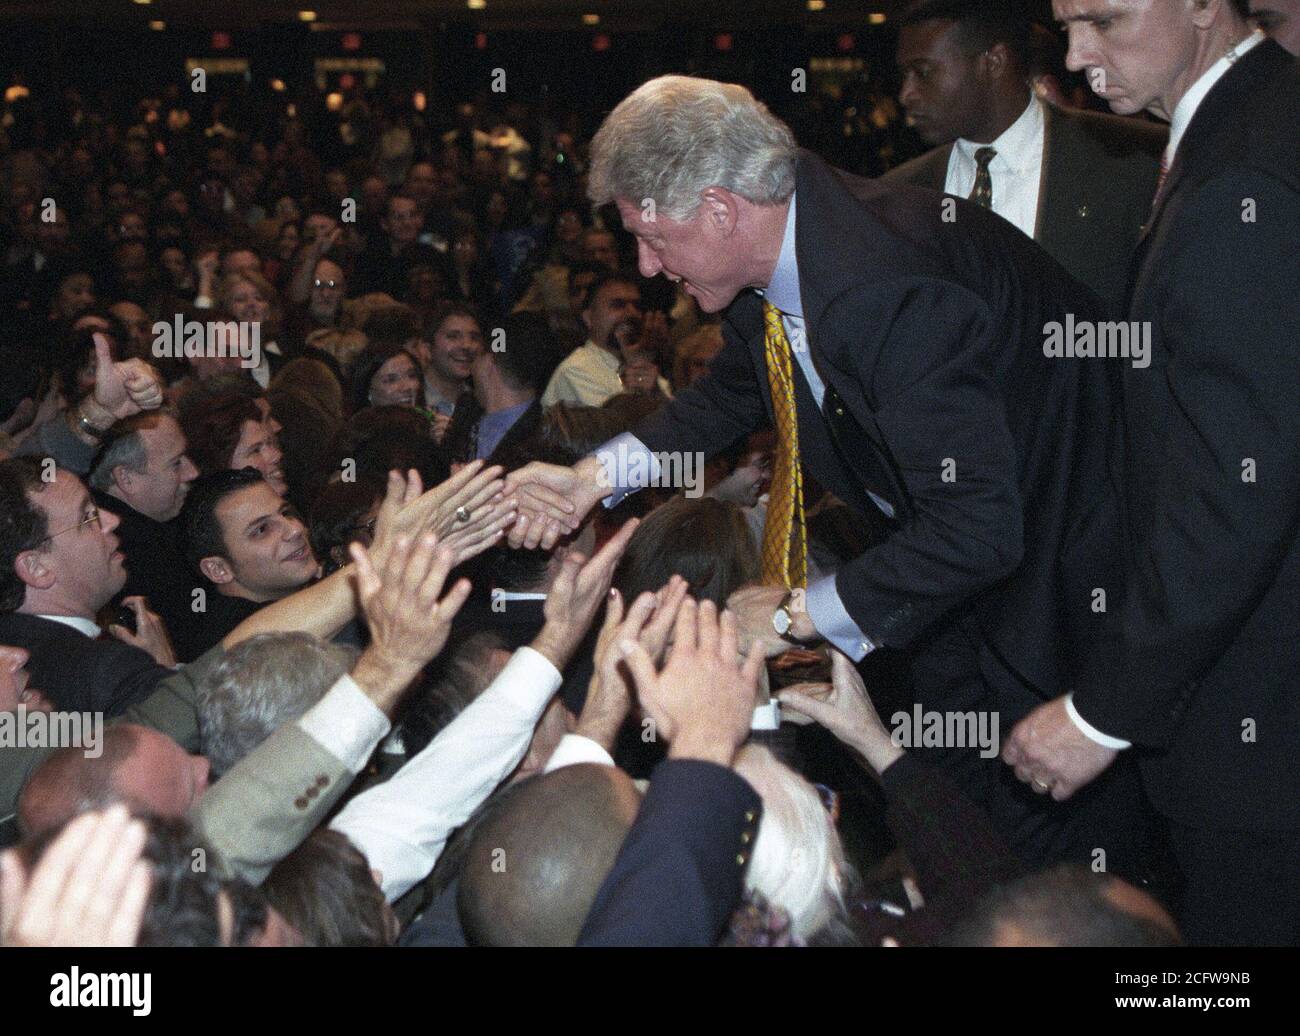 Photograph of President William Jefferson Clinton Shaking Hands on Stage at a 'Hillary Rodham Clinton for Senate' Event in Hempstead, New York 10/22/2000 Stock Photo